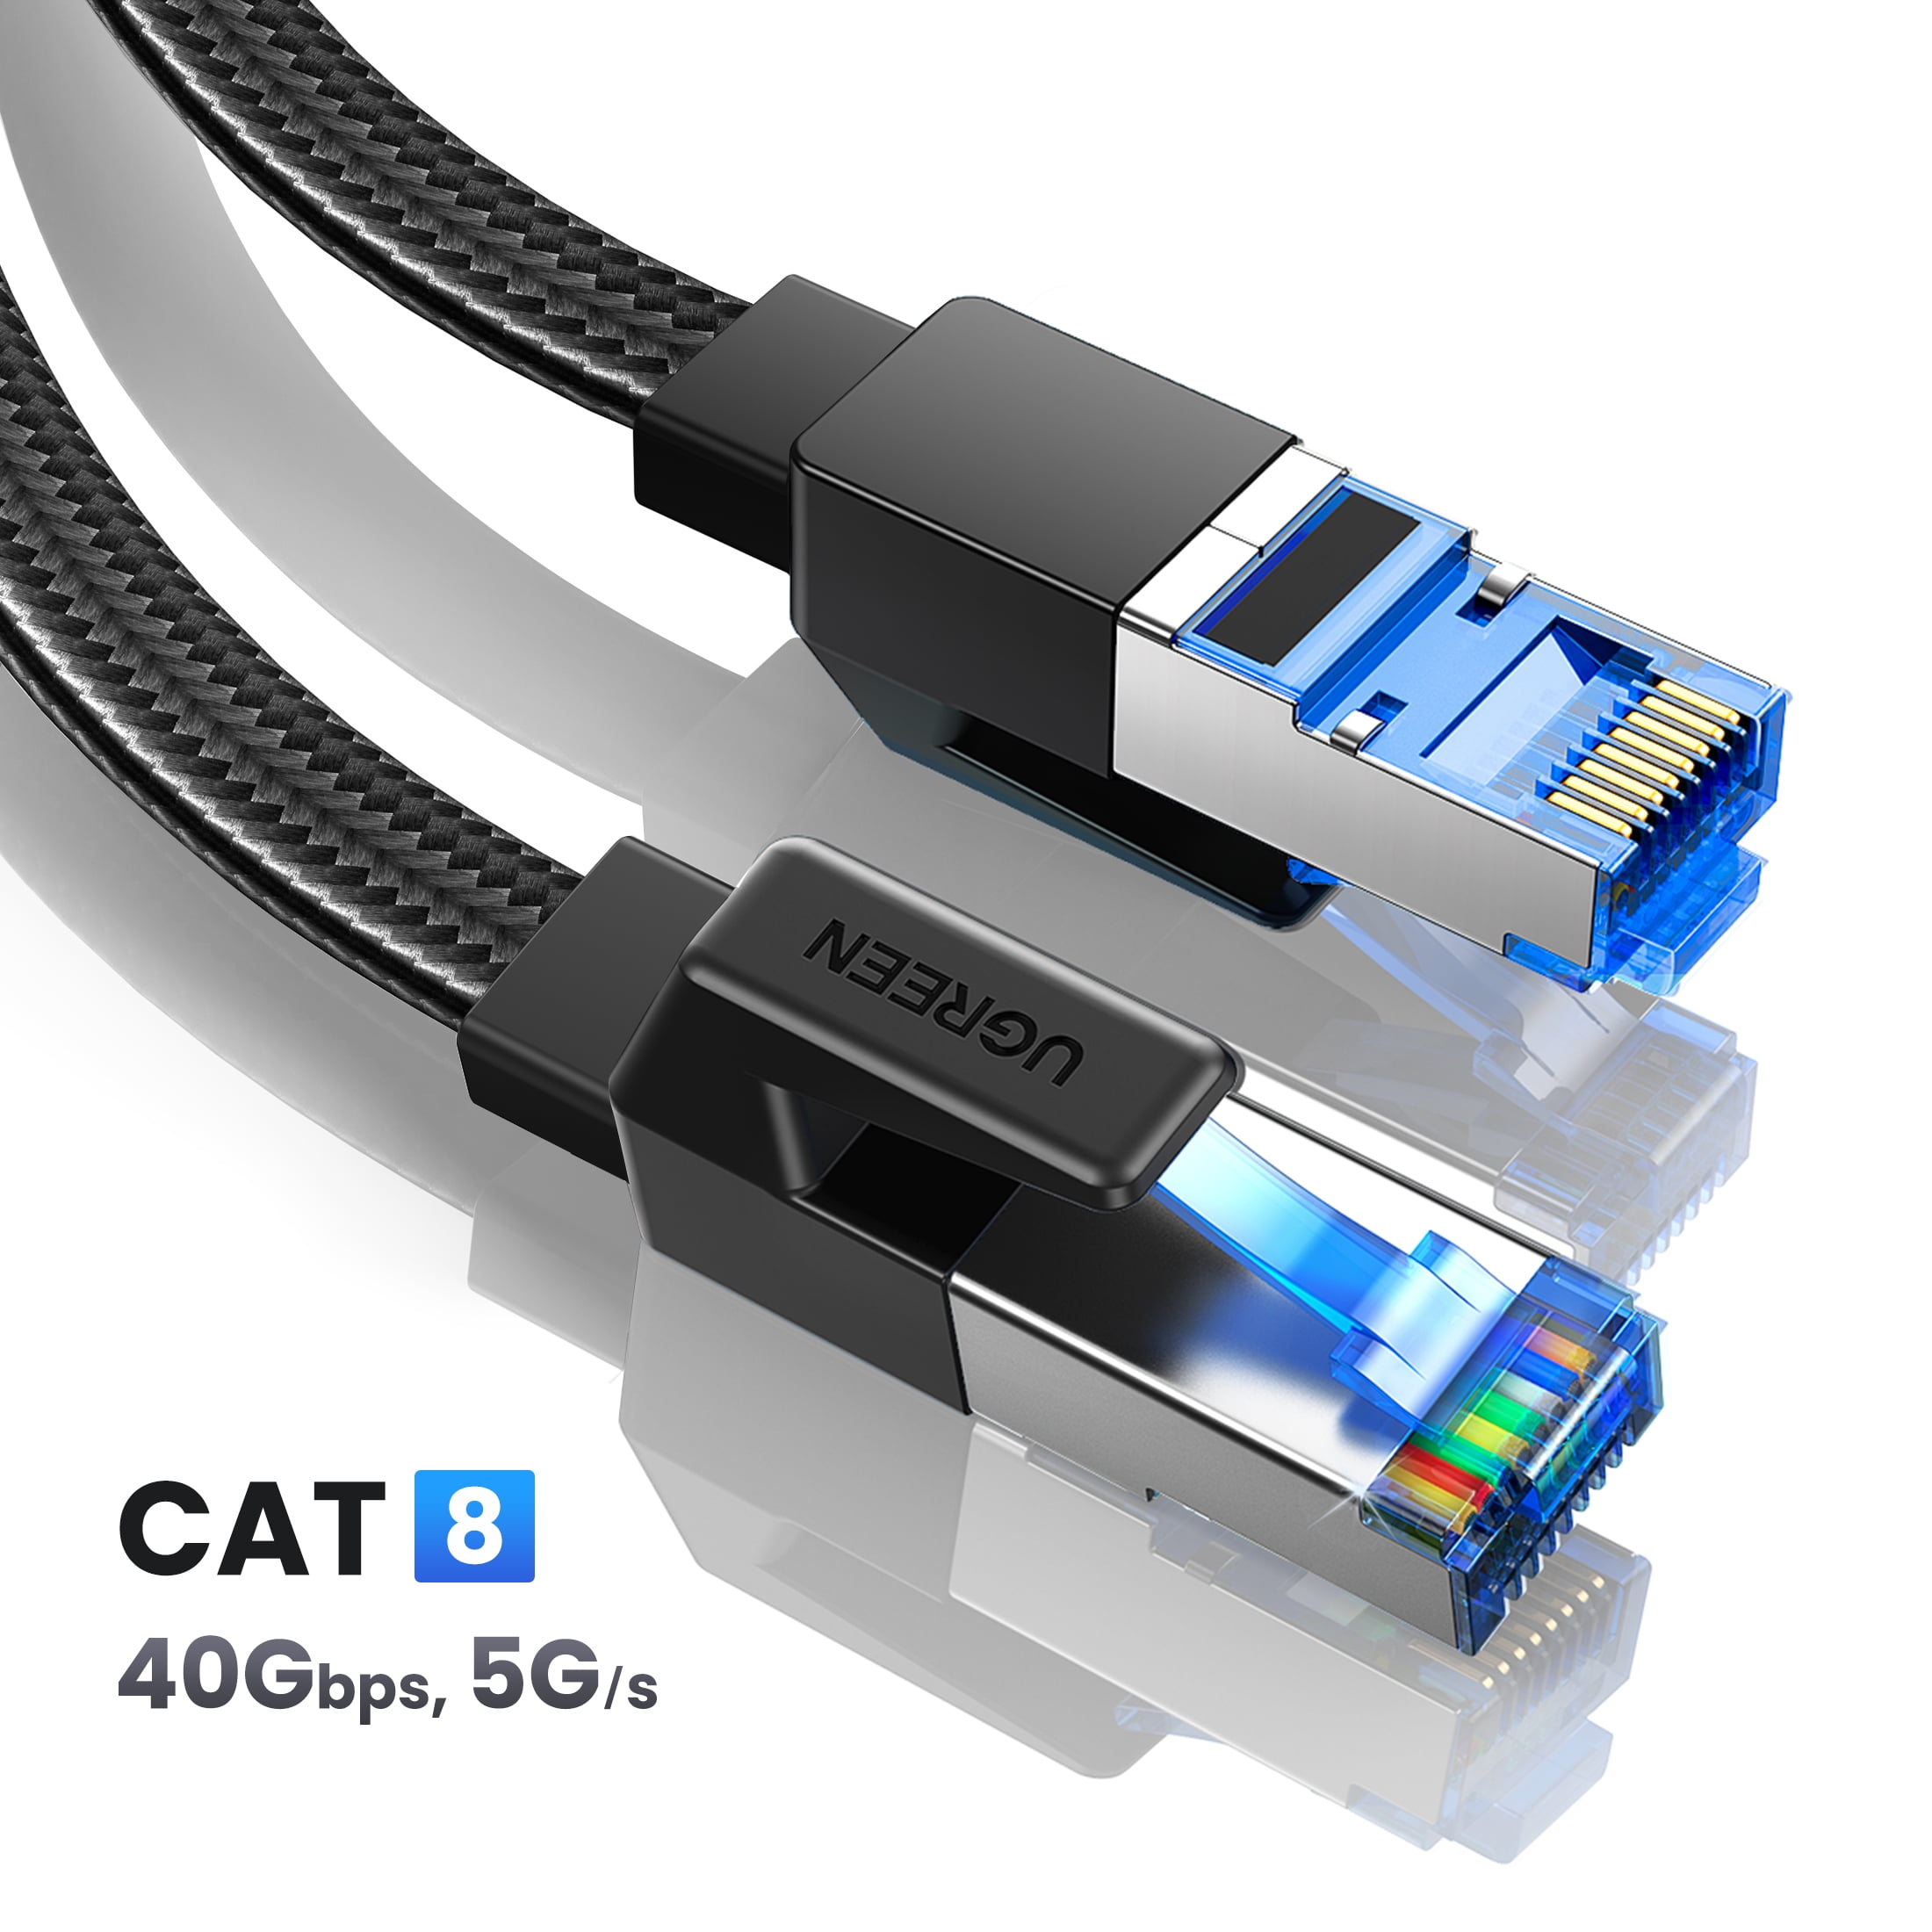 Yuaice Cat 8 Ethernet Cable, 40FT Heavy Duty High Speed Flat